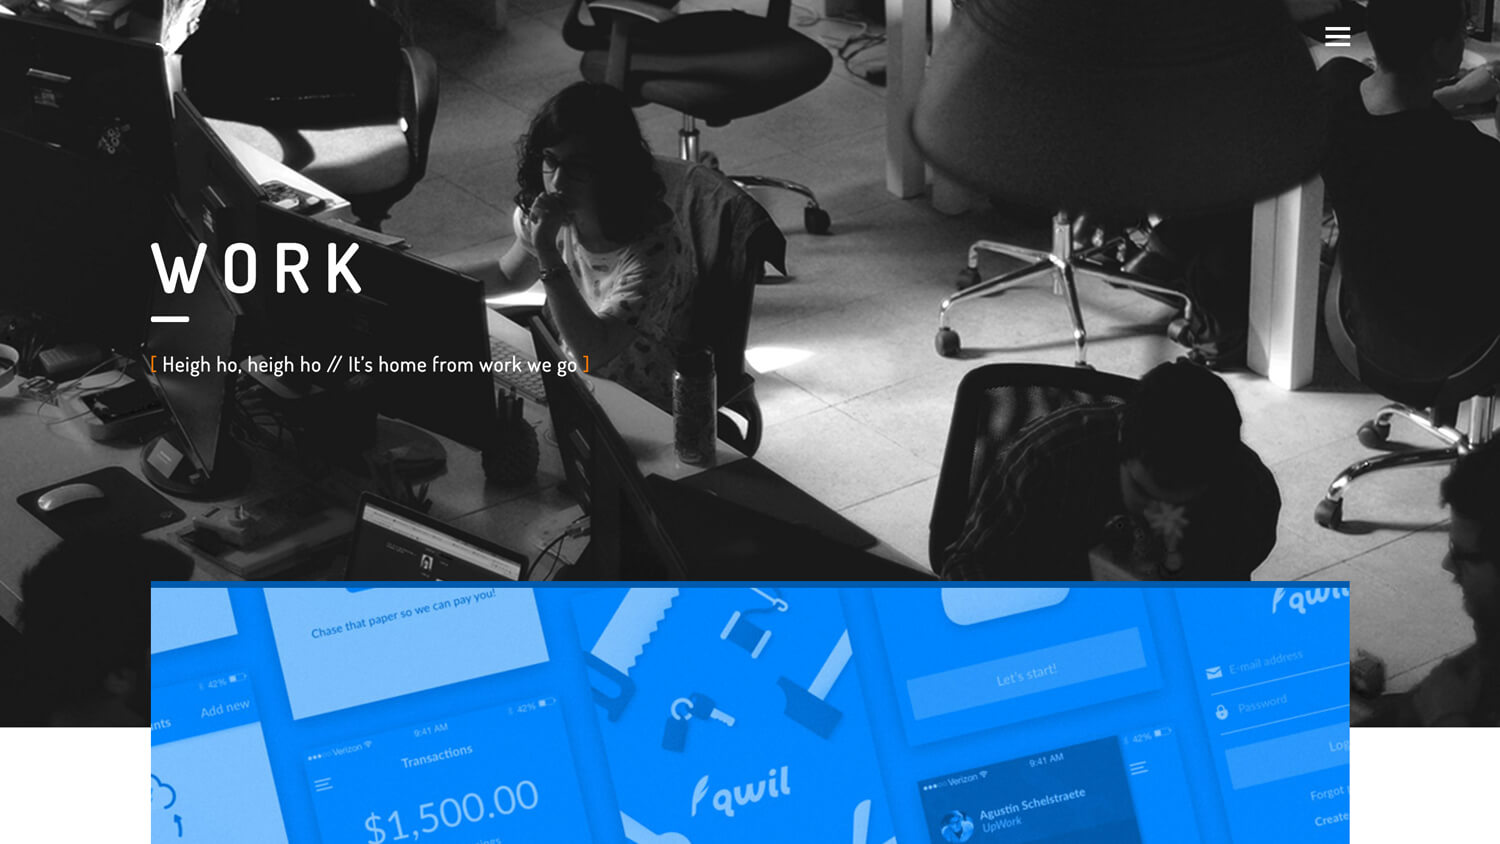 Aerolab – Design and Development for Startups and Leading Brands